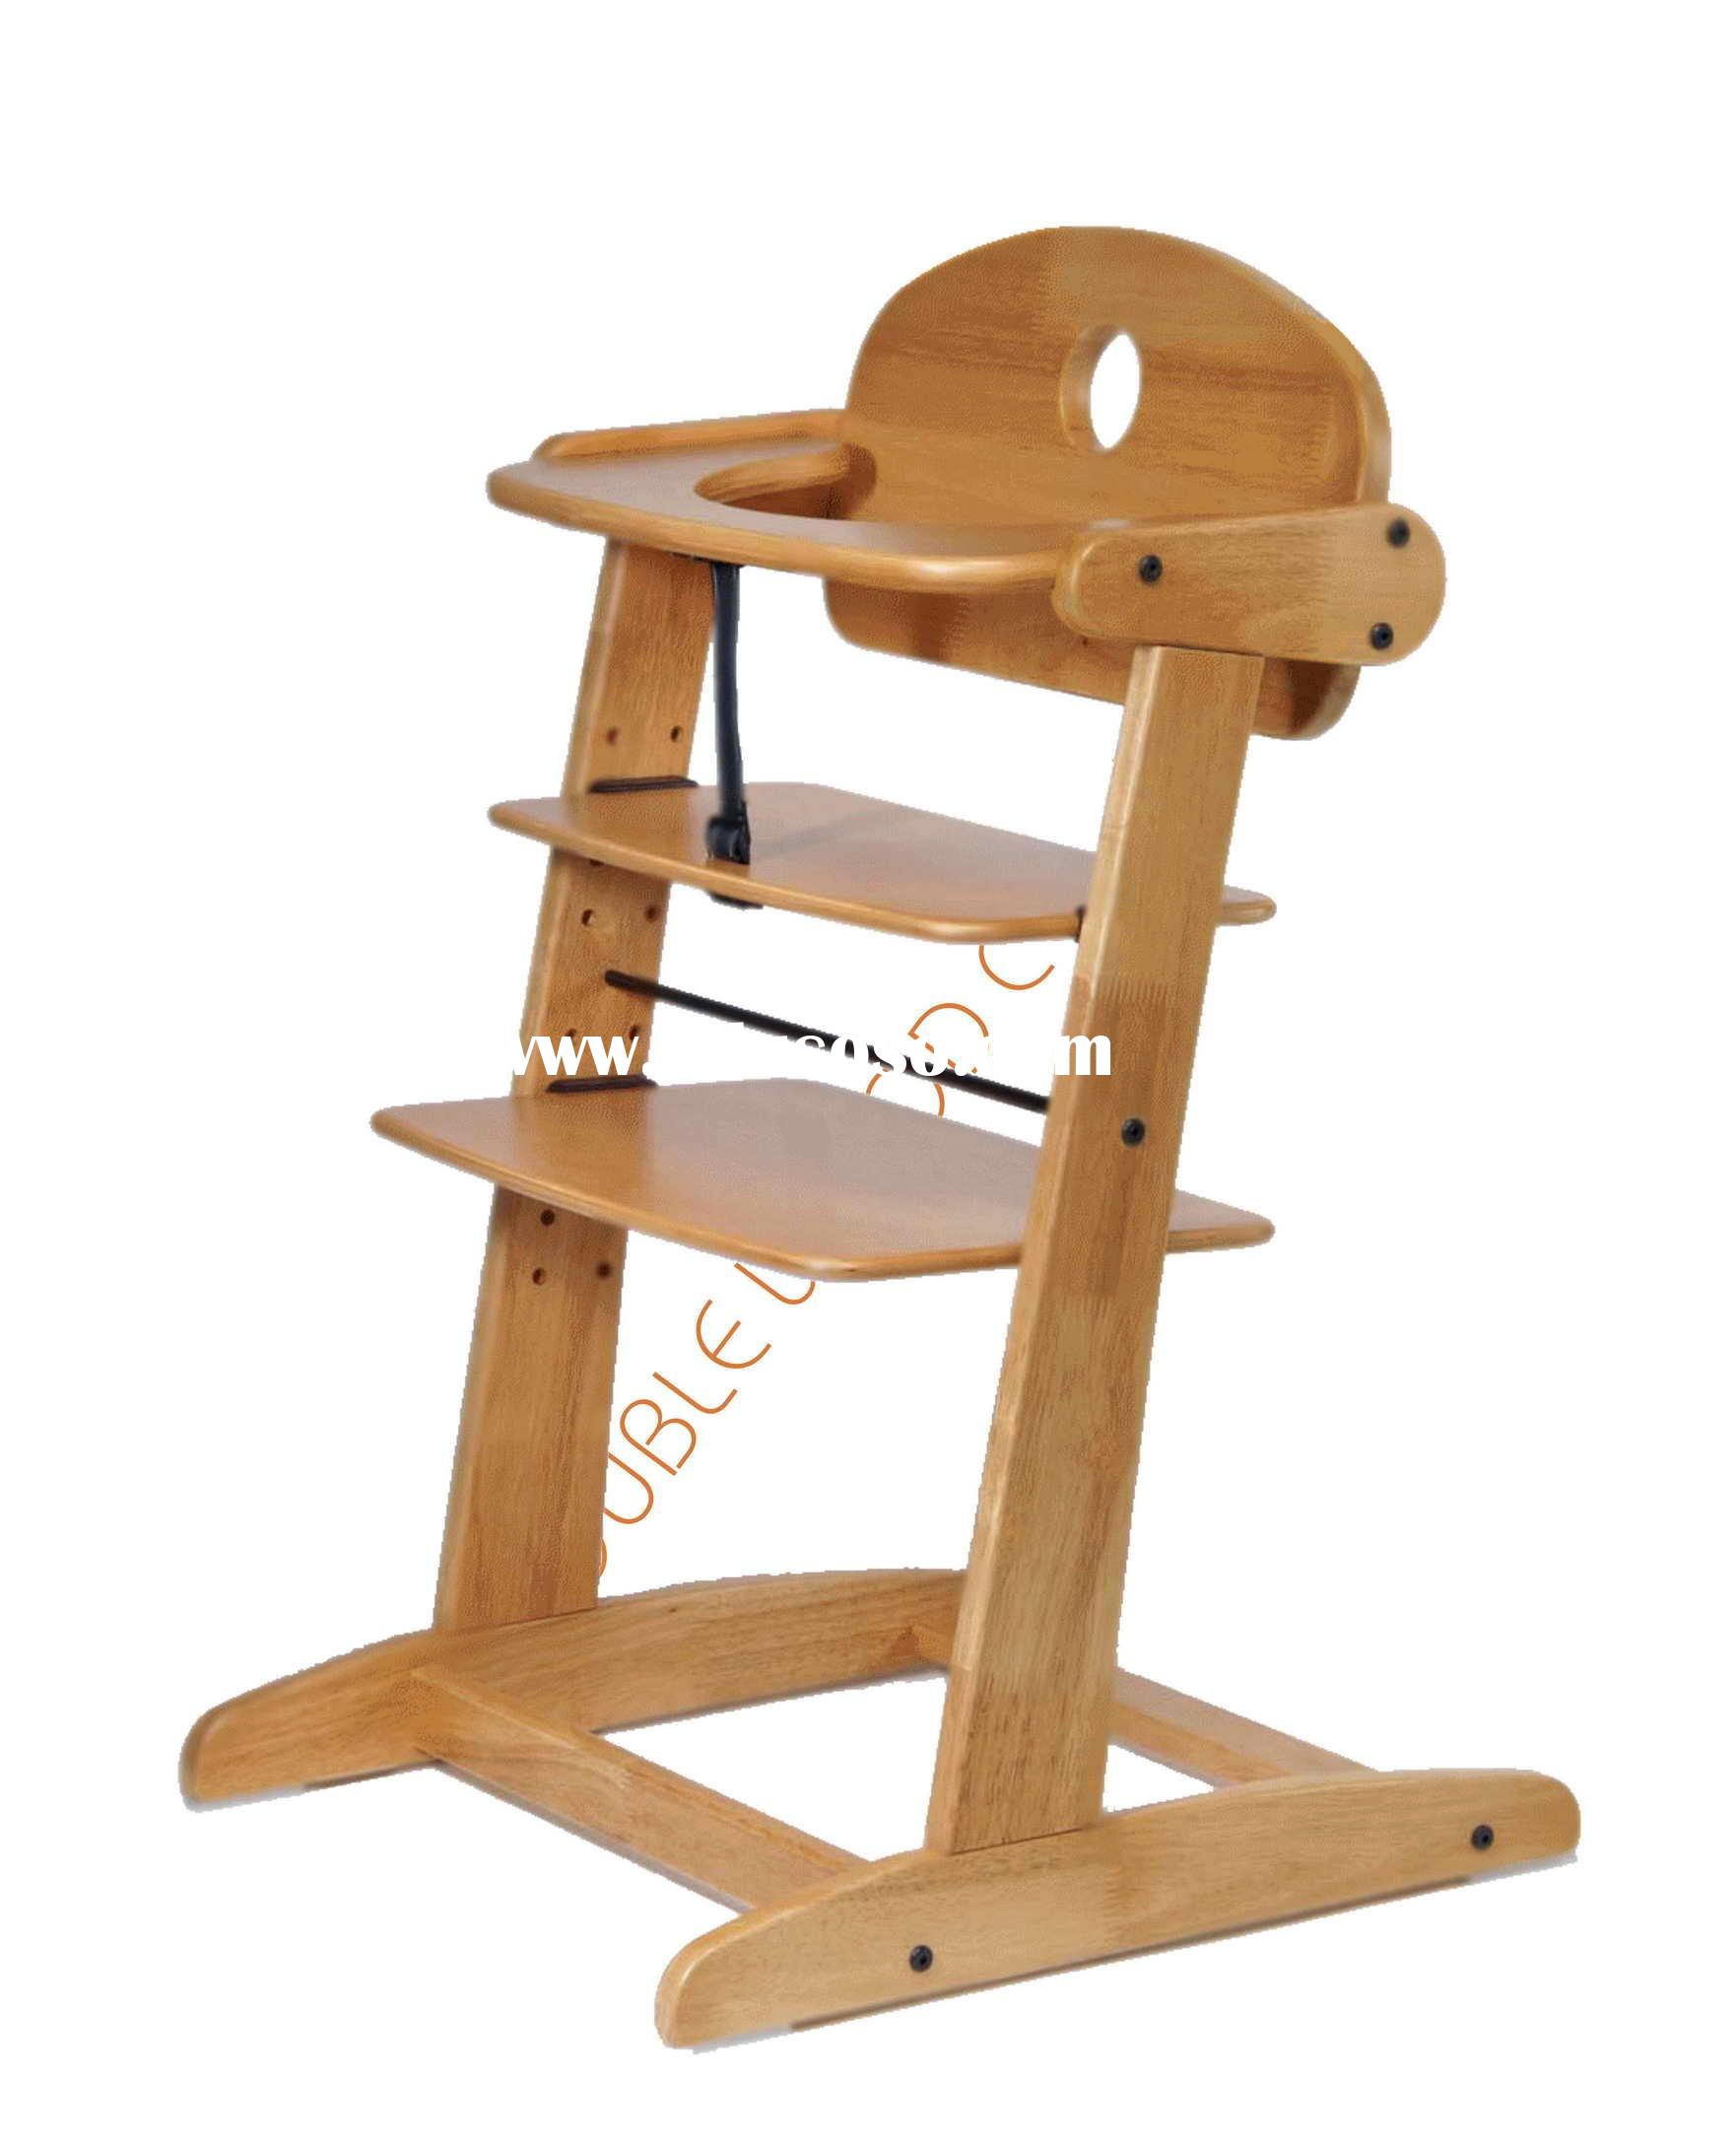 Wood High Chair Plans | Easy-To-Follow How To build a DIY Woodworking ...